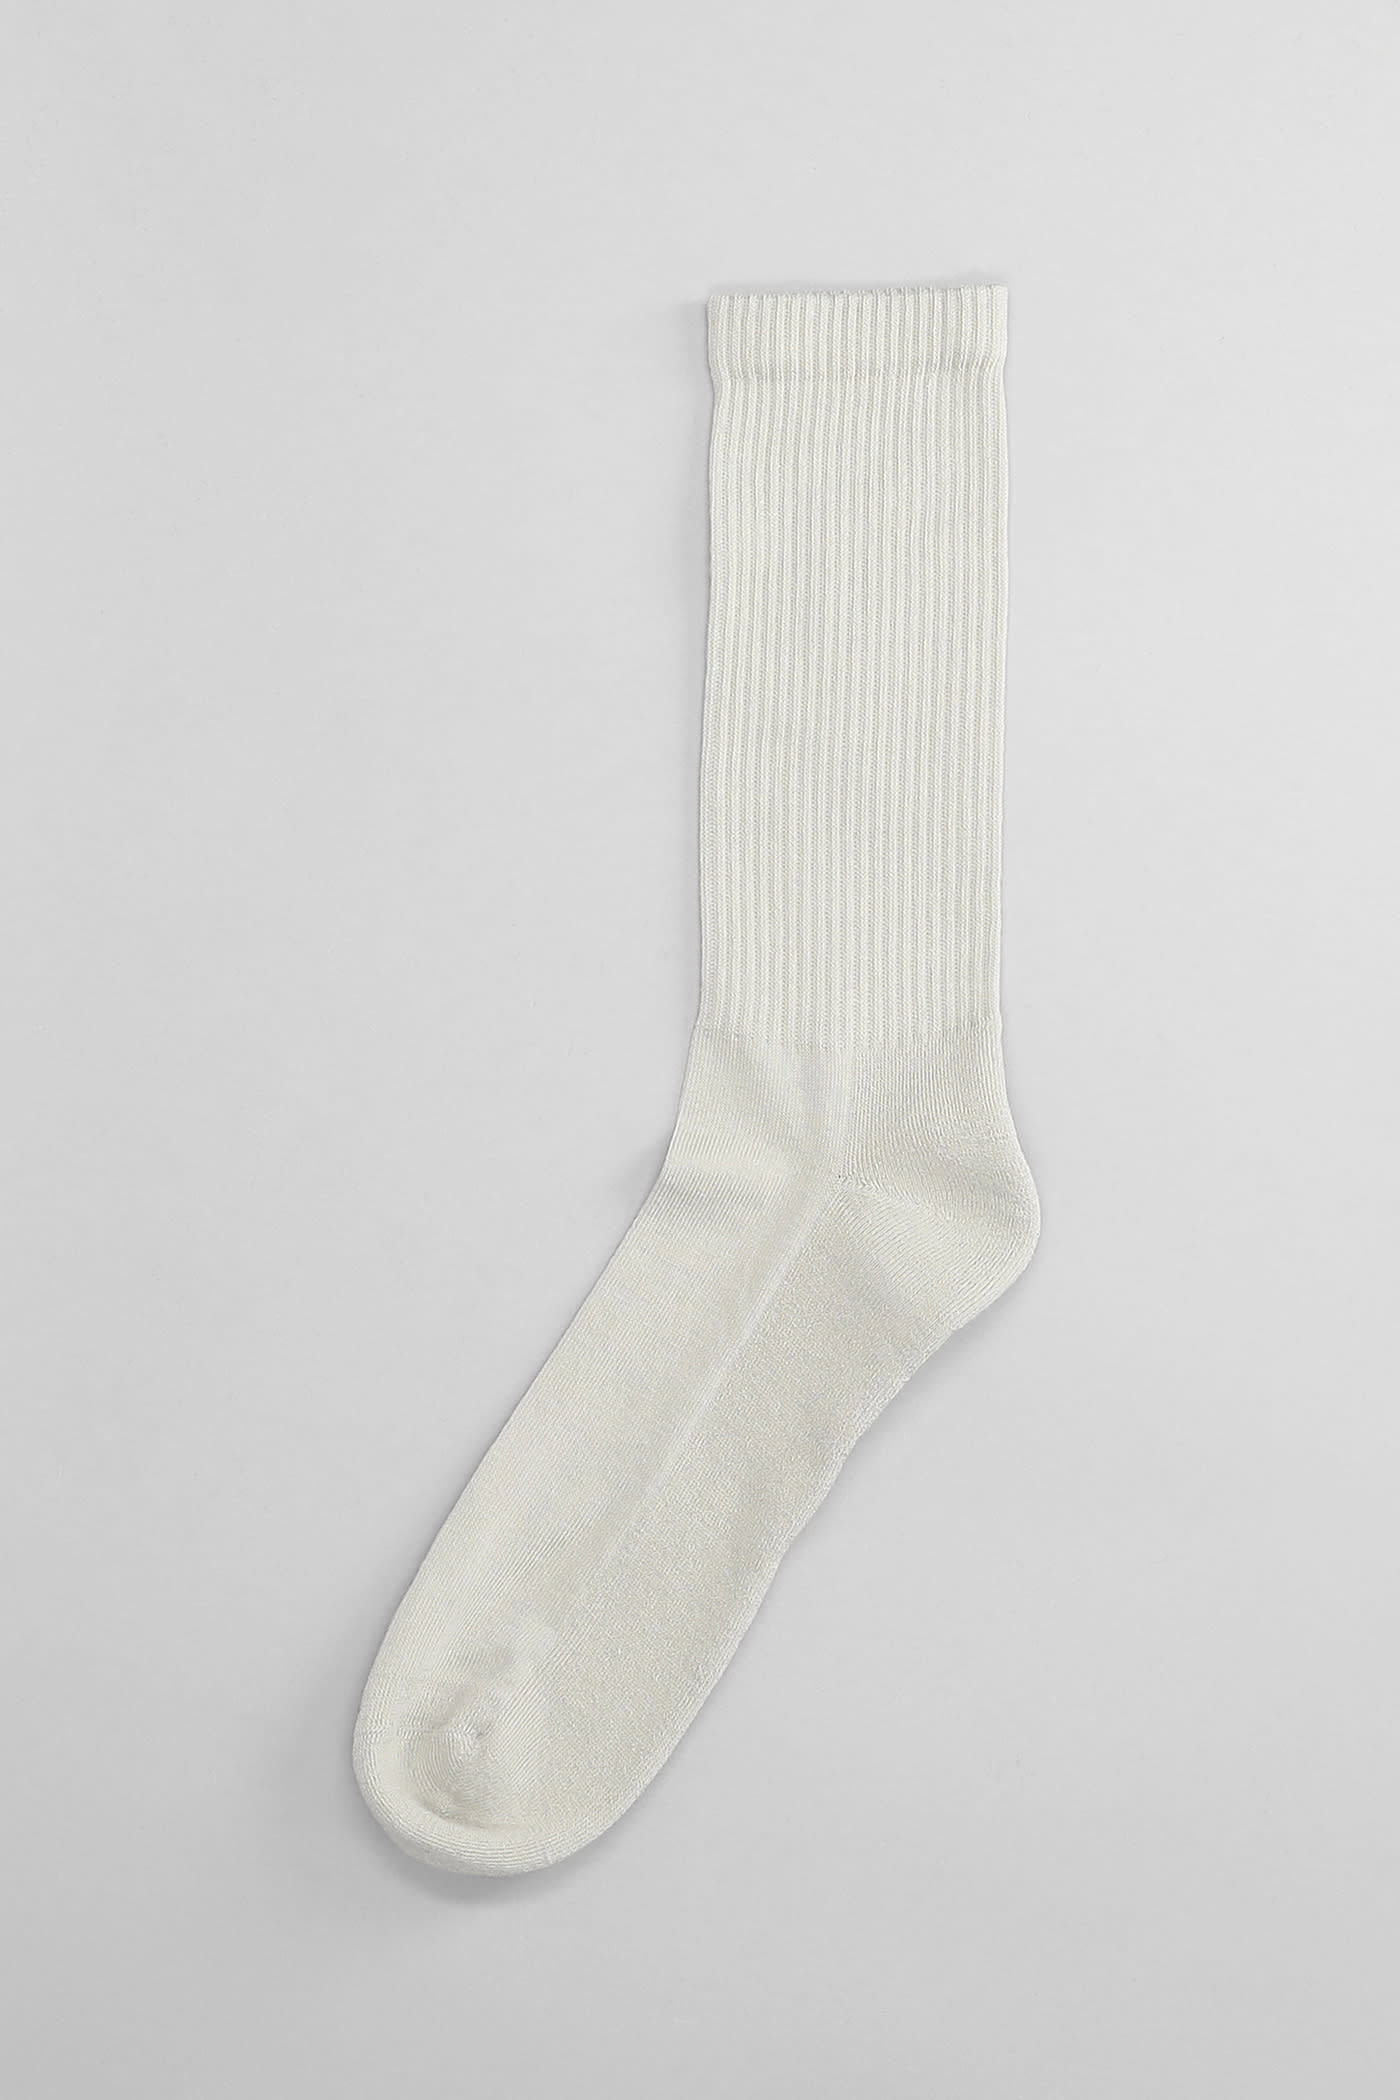 Shop 44 Label Group Socks In Grey Cotton In White